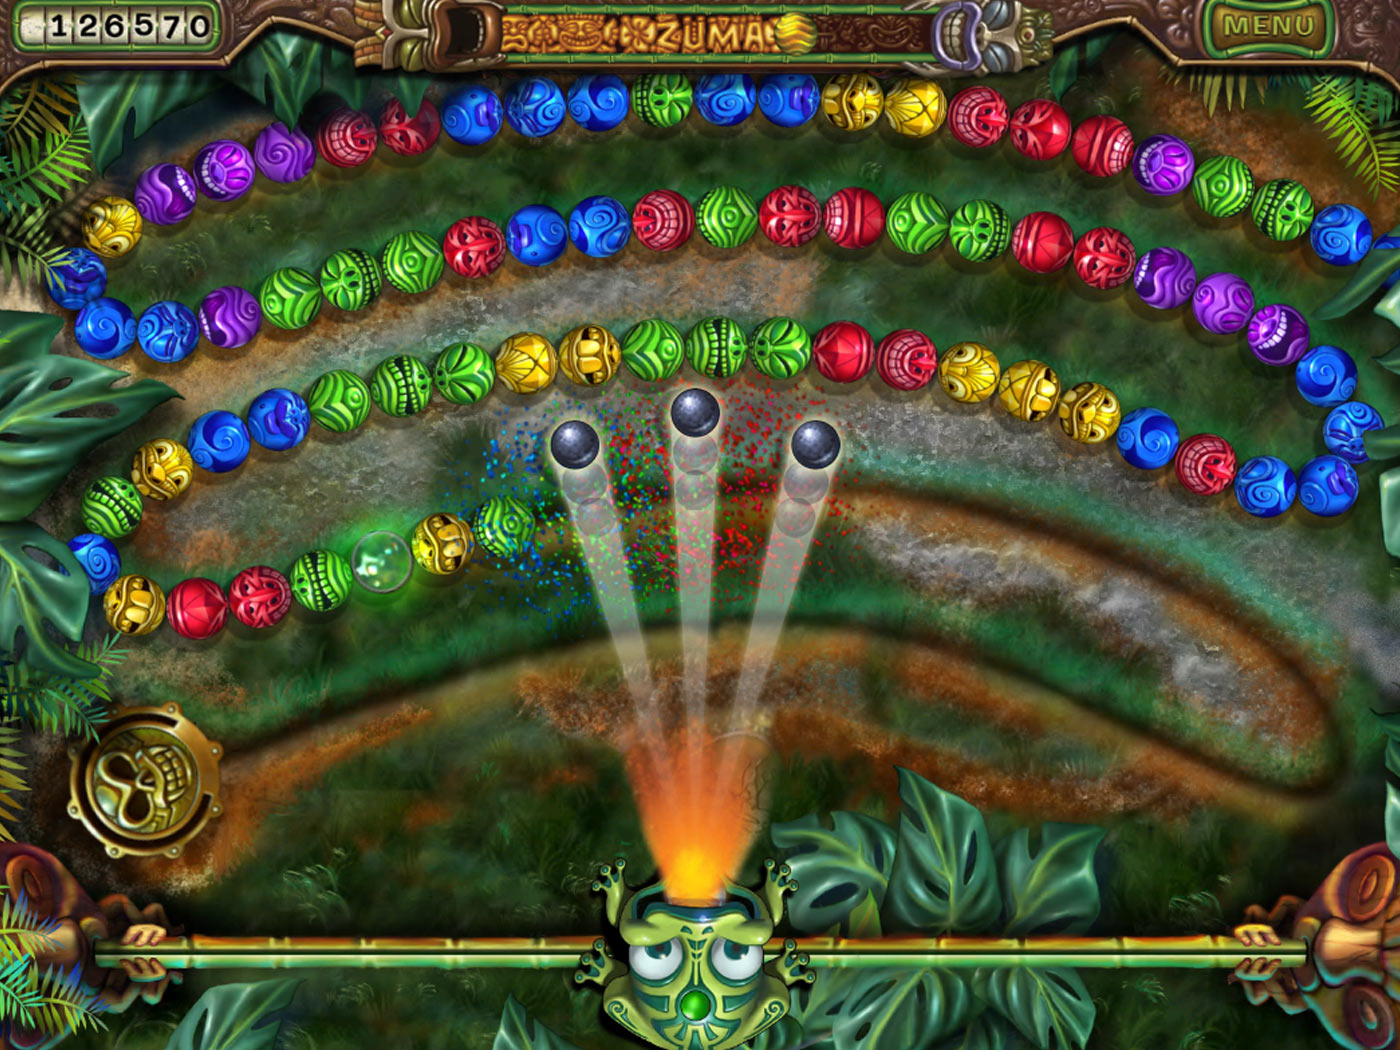 Free Download Bejeweled Games For Windows 7